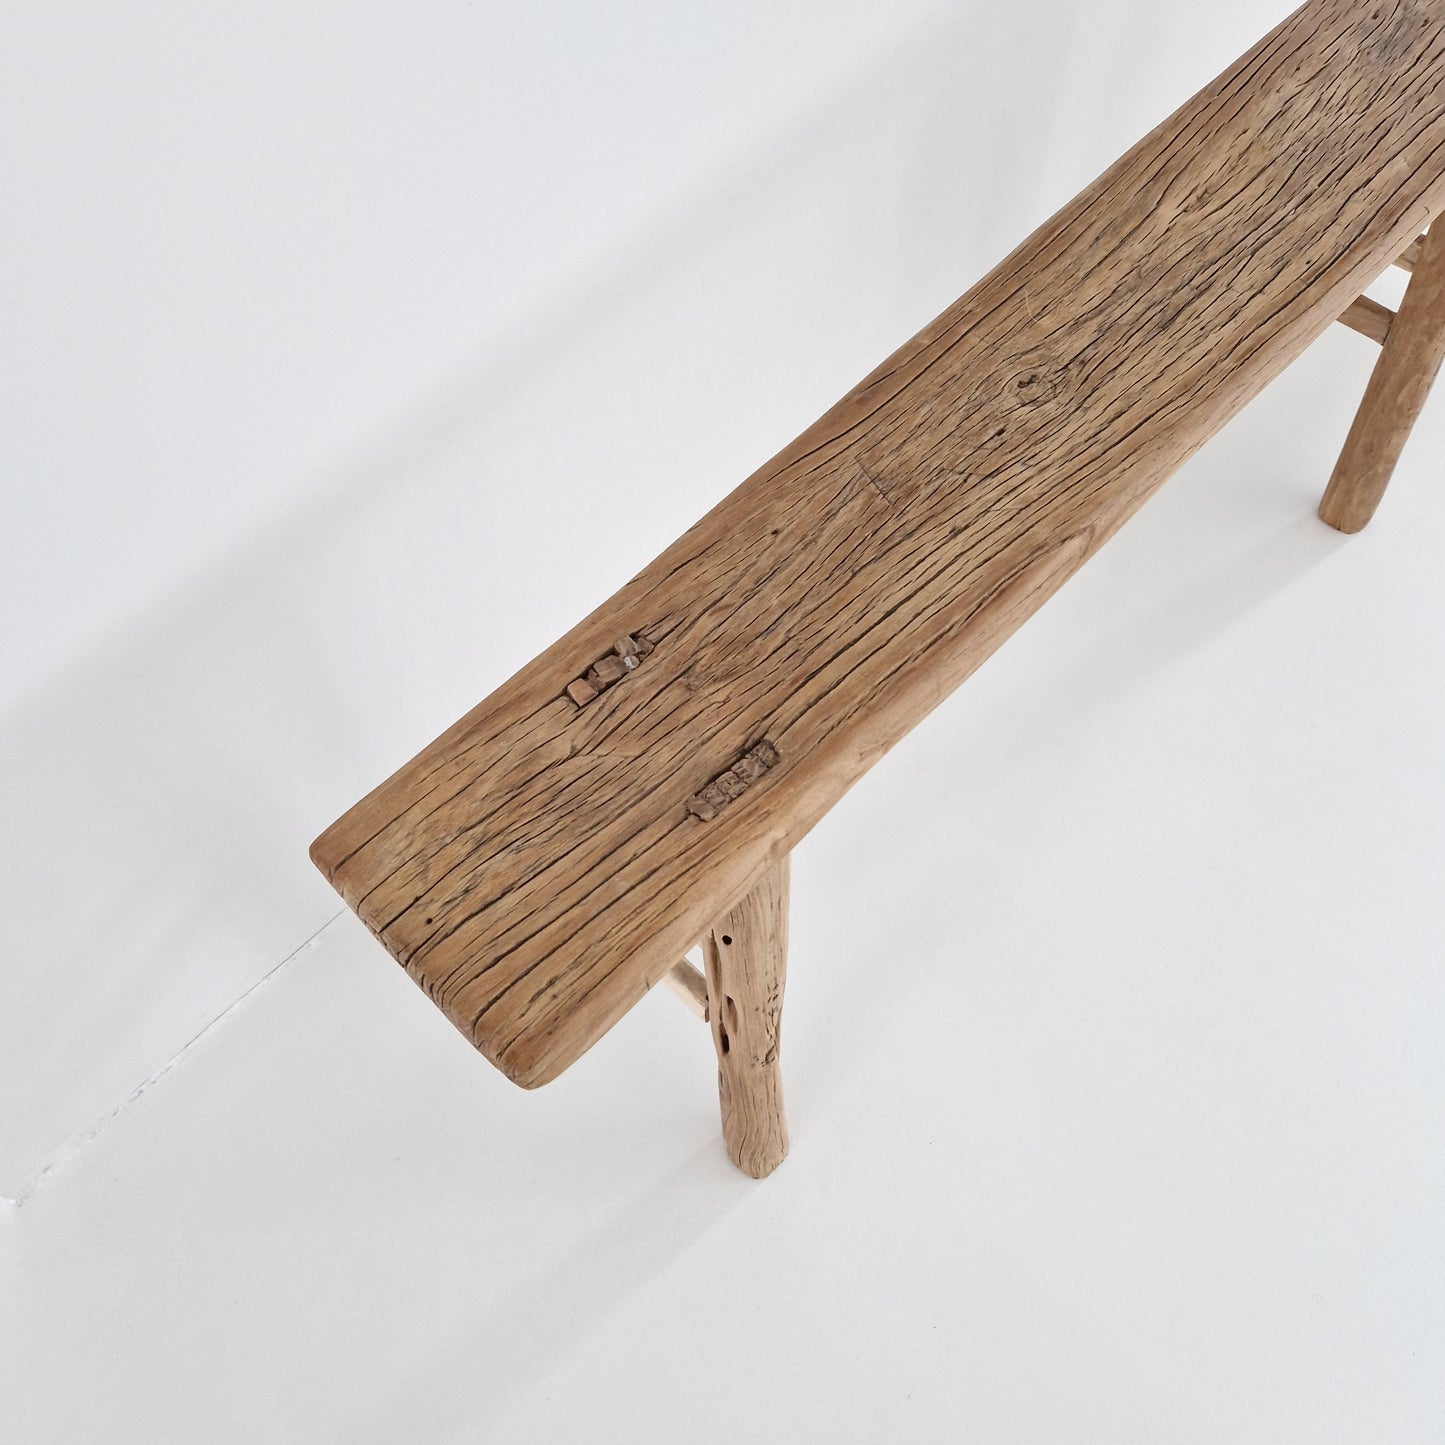 Old wooden bench #2 (117cm)